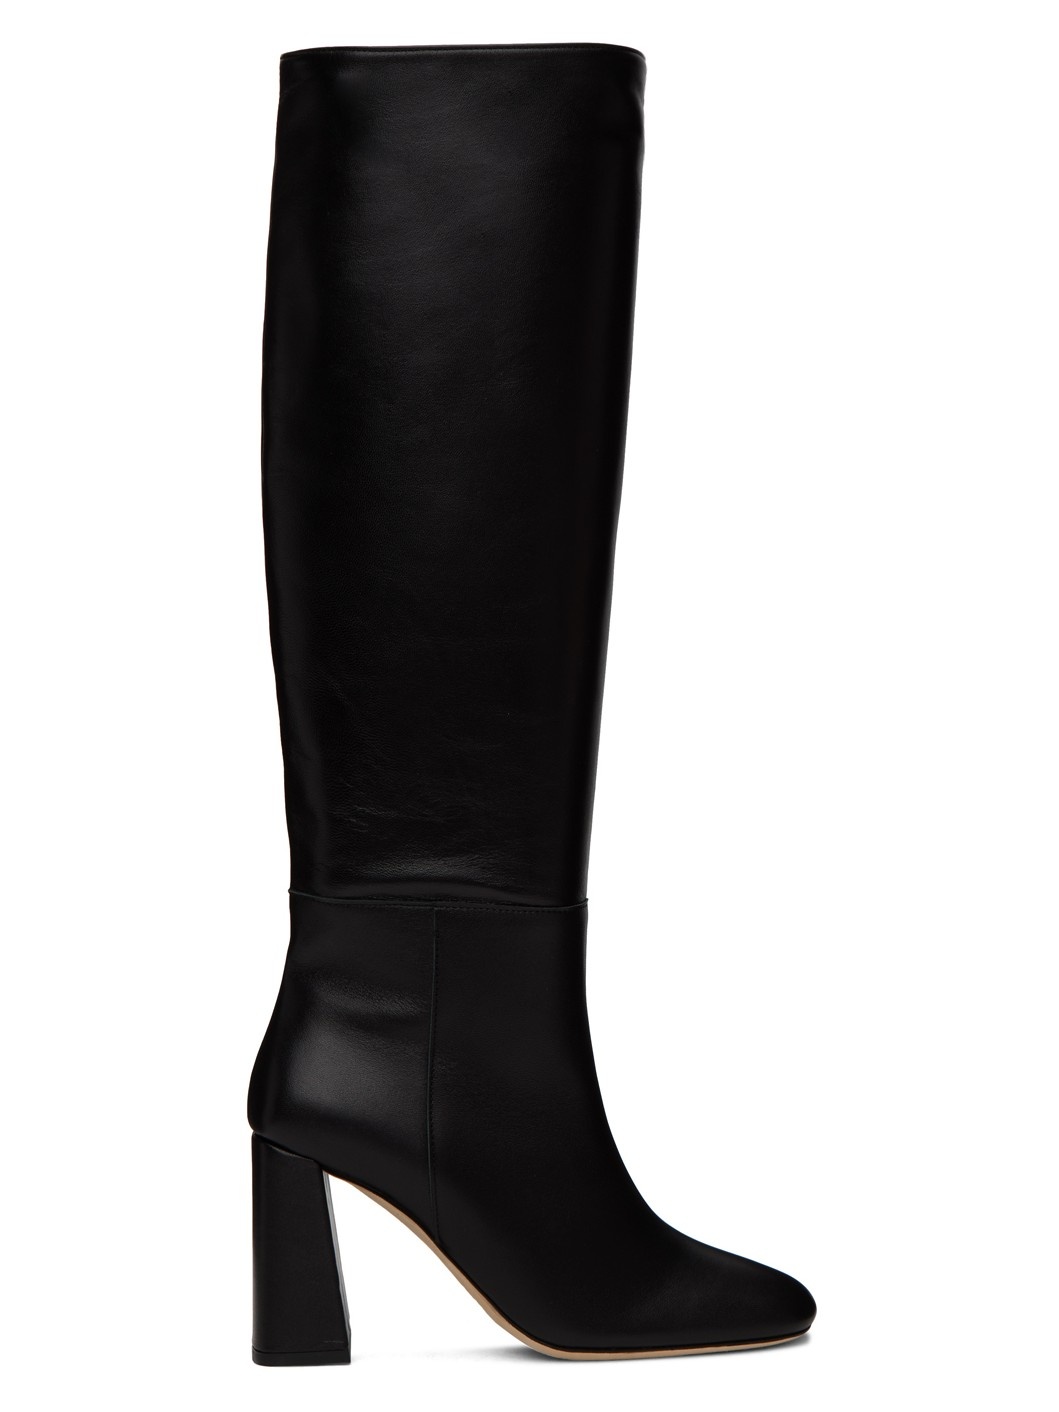 Black Syd Boots - 1